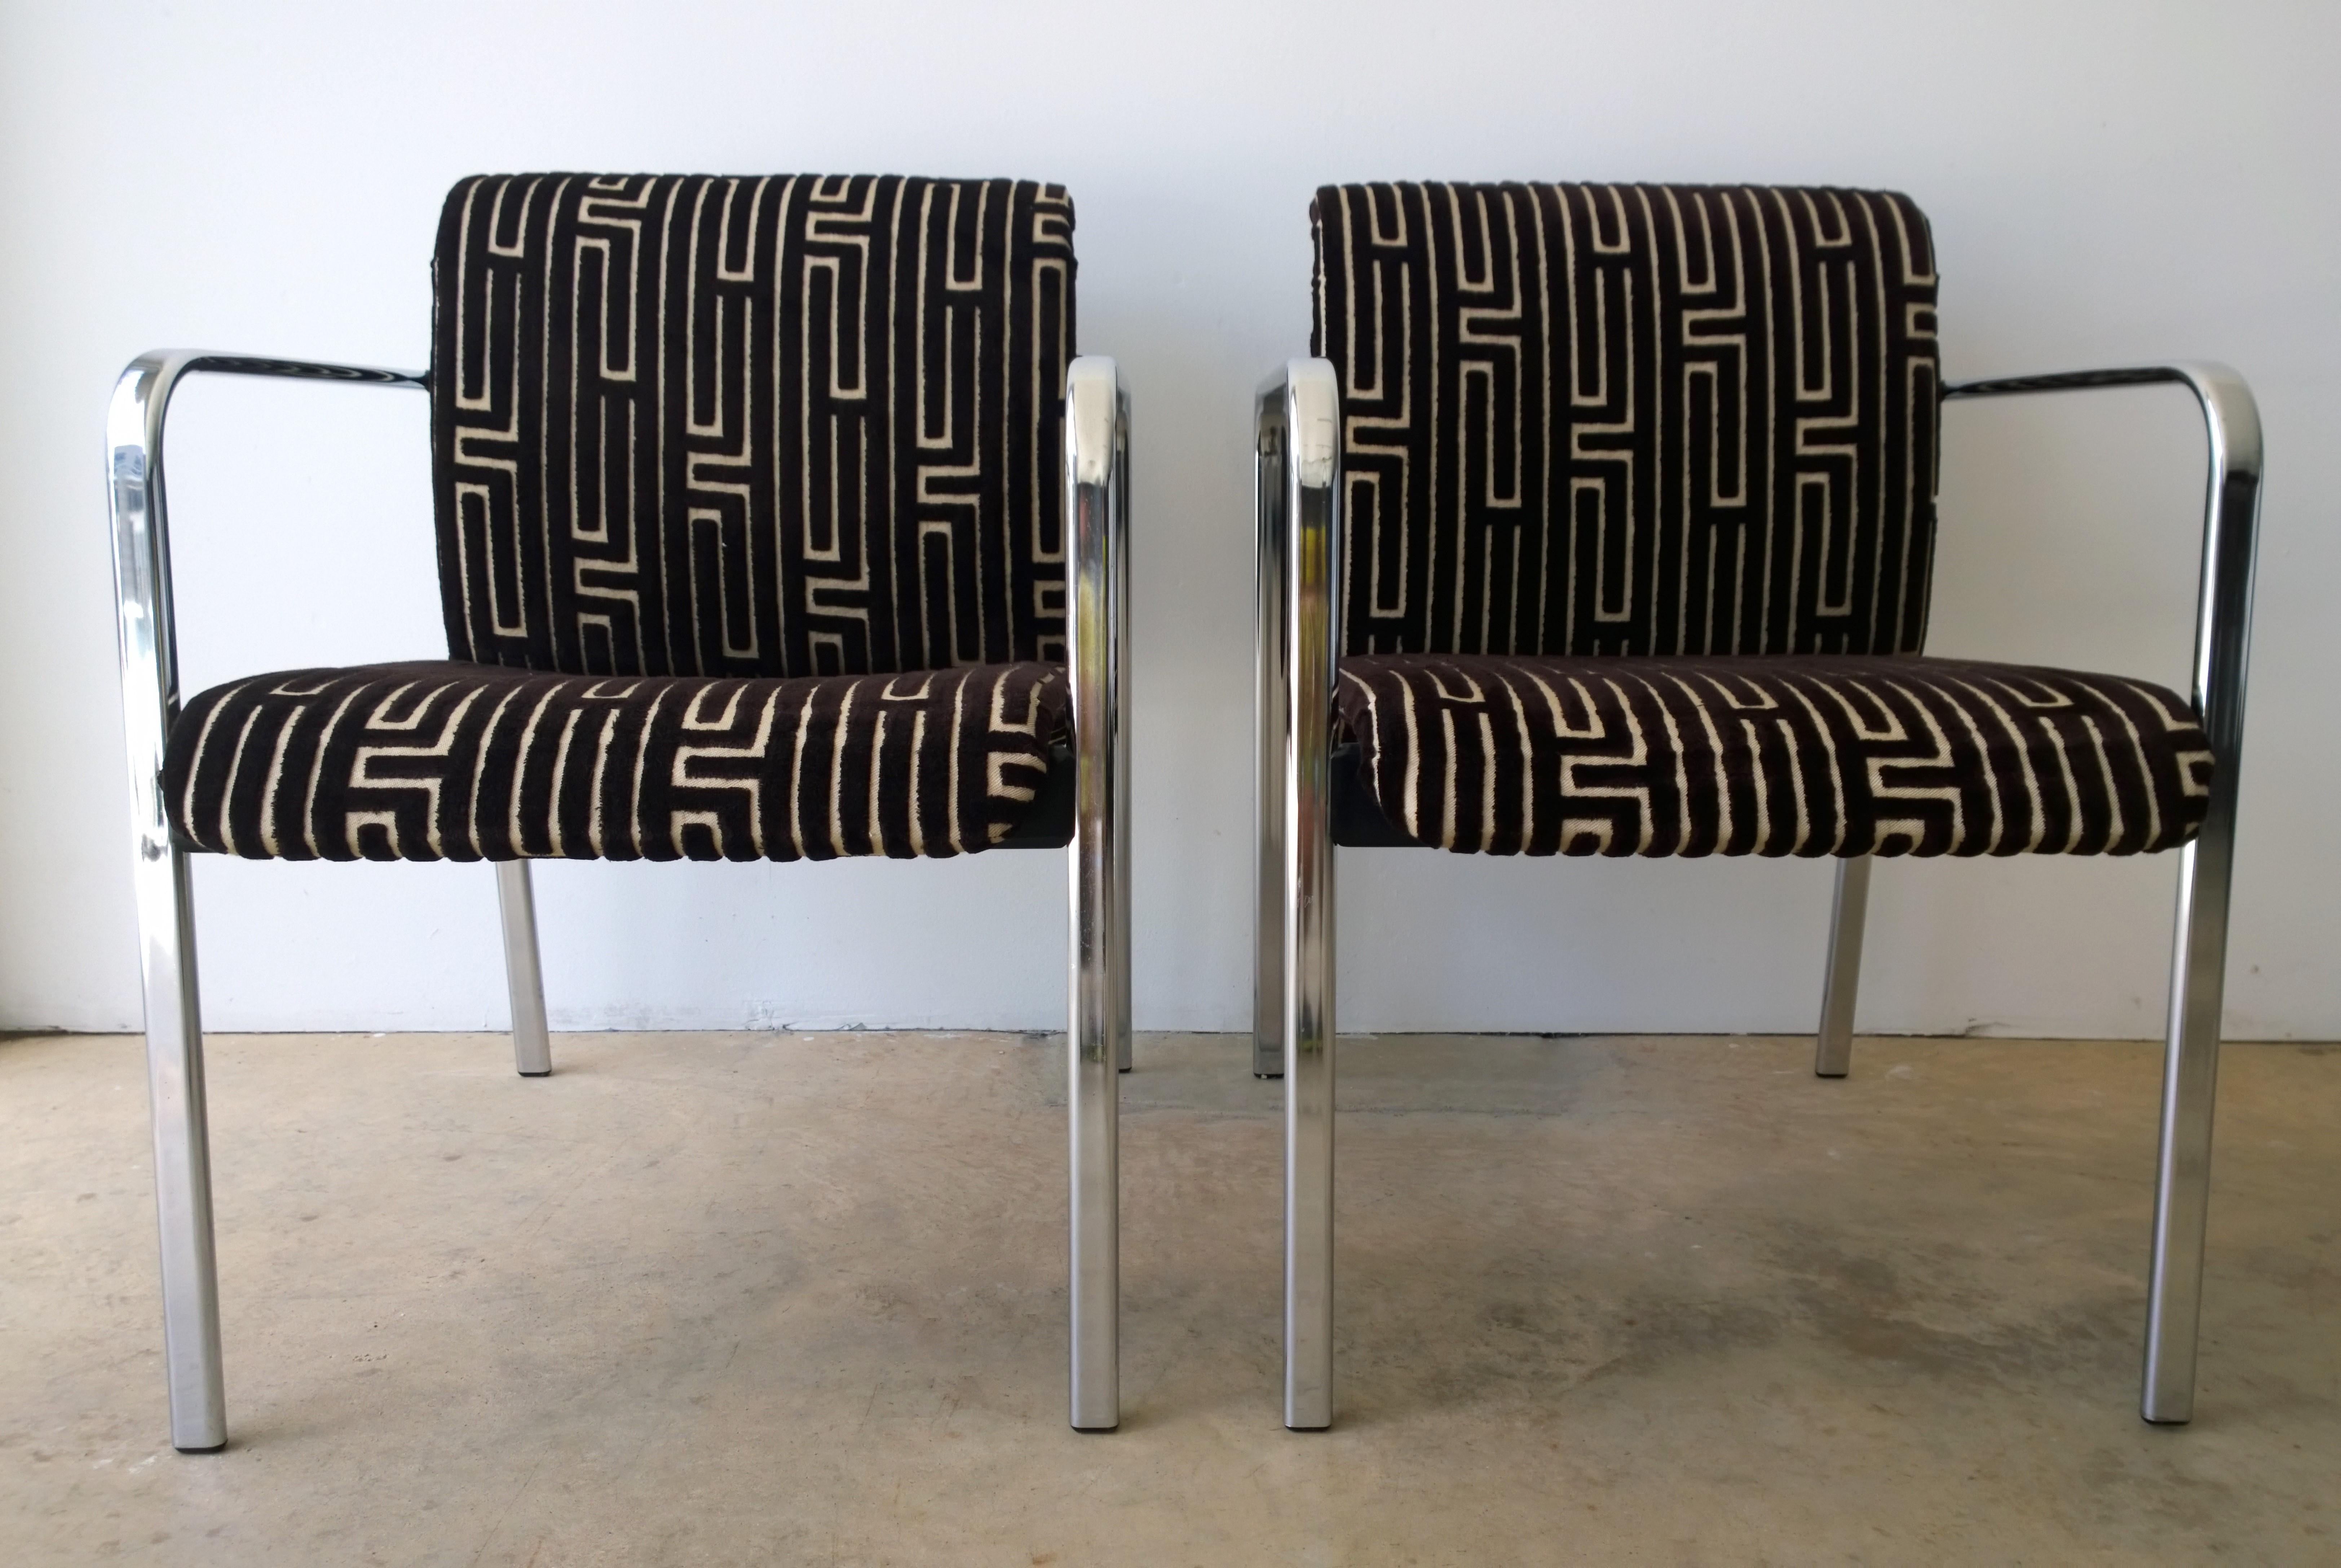 Offered is a pair of vintage Mid-Century Modern Peter Protzman for Herman Miller chrome-plated armchairs with black rubber accents that have been newly upholstered in a burnt-out chocolate brown and tan velvet geometric-Greek key style fabric.